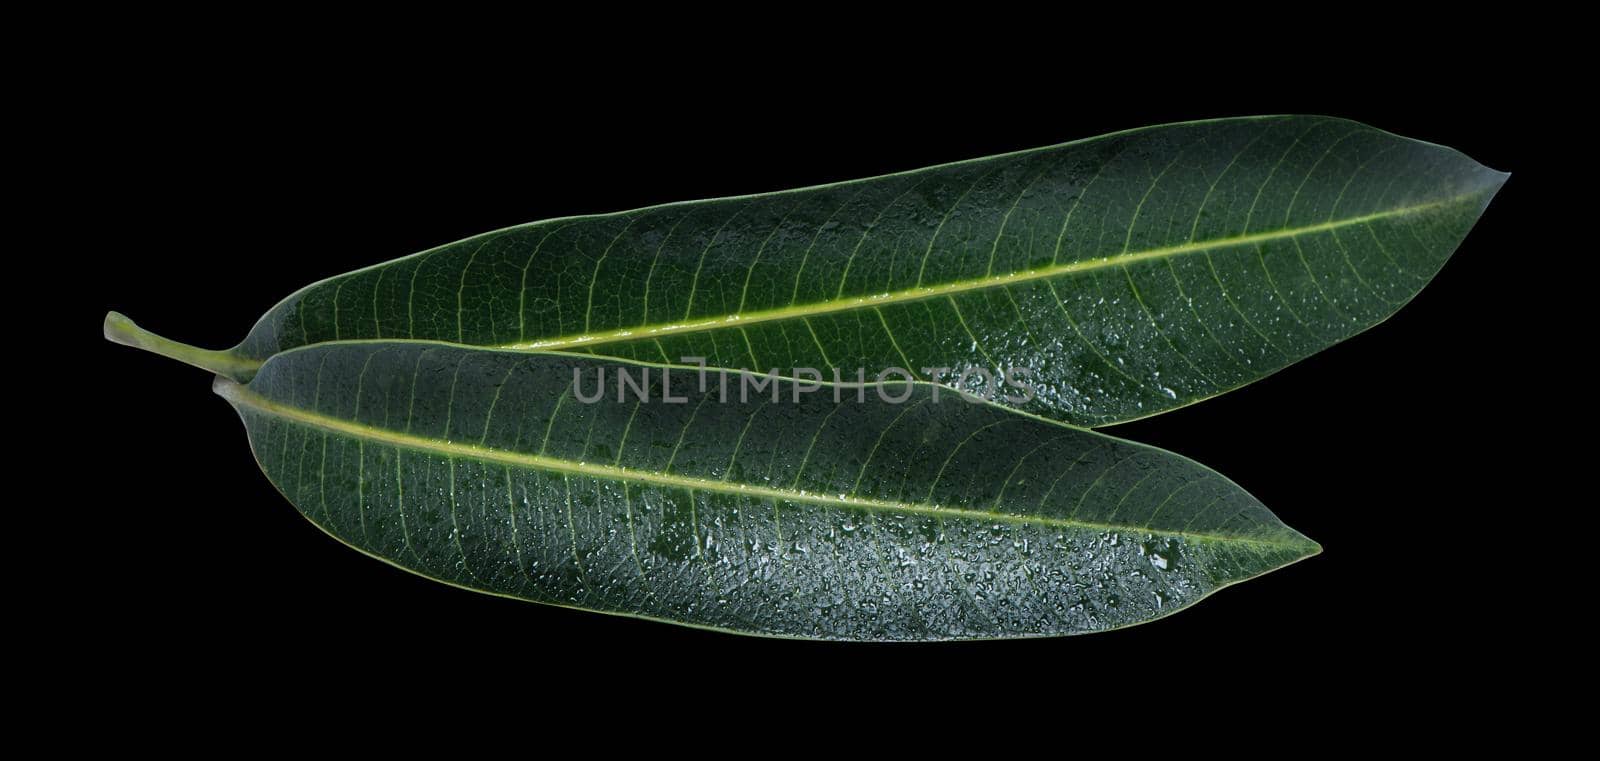 Beautiful green mango leaves isolated on black background with water drops in detail. Clipping path, cut out, close up, macro. Tropical concept.